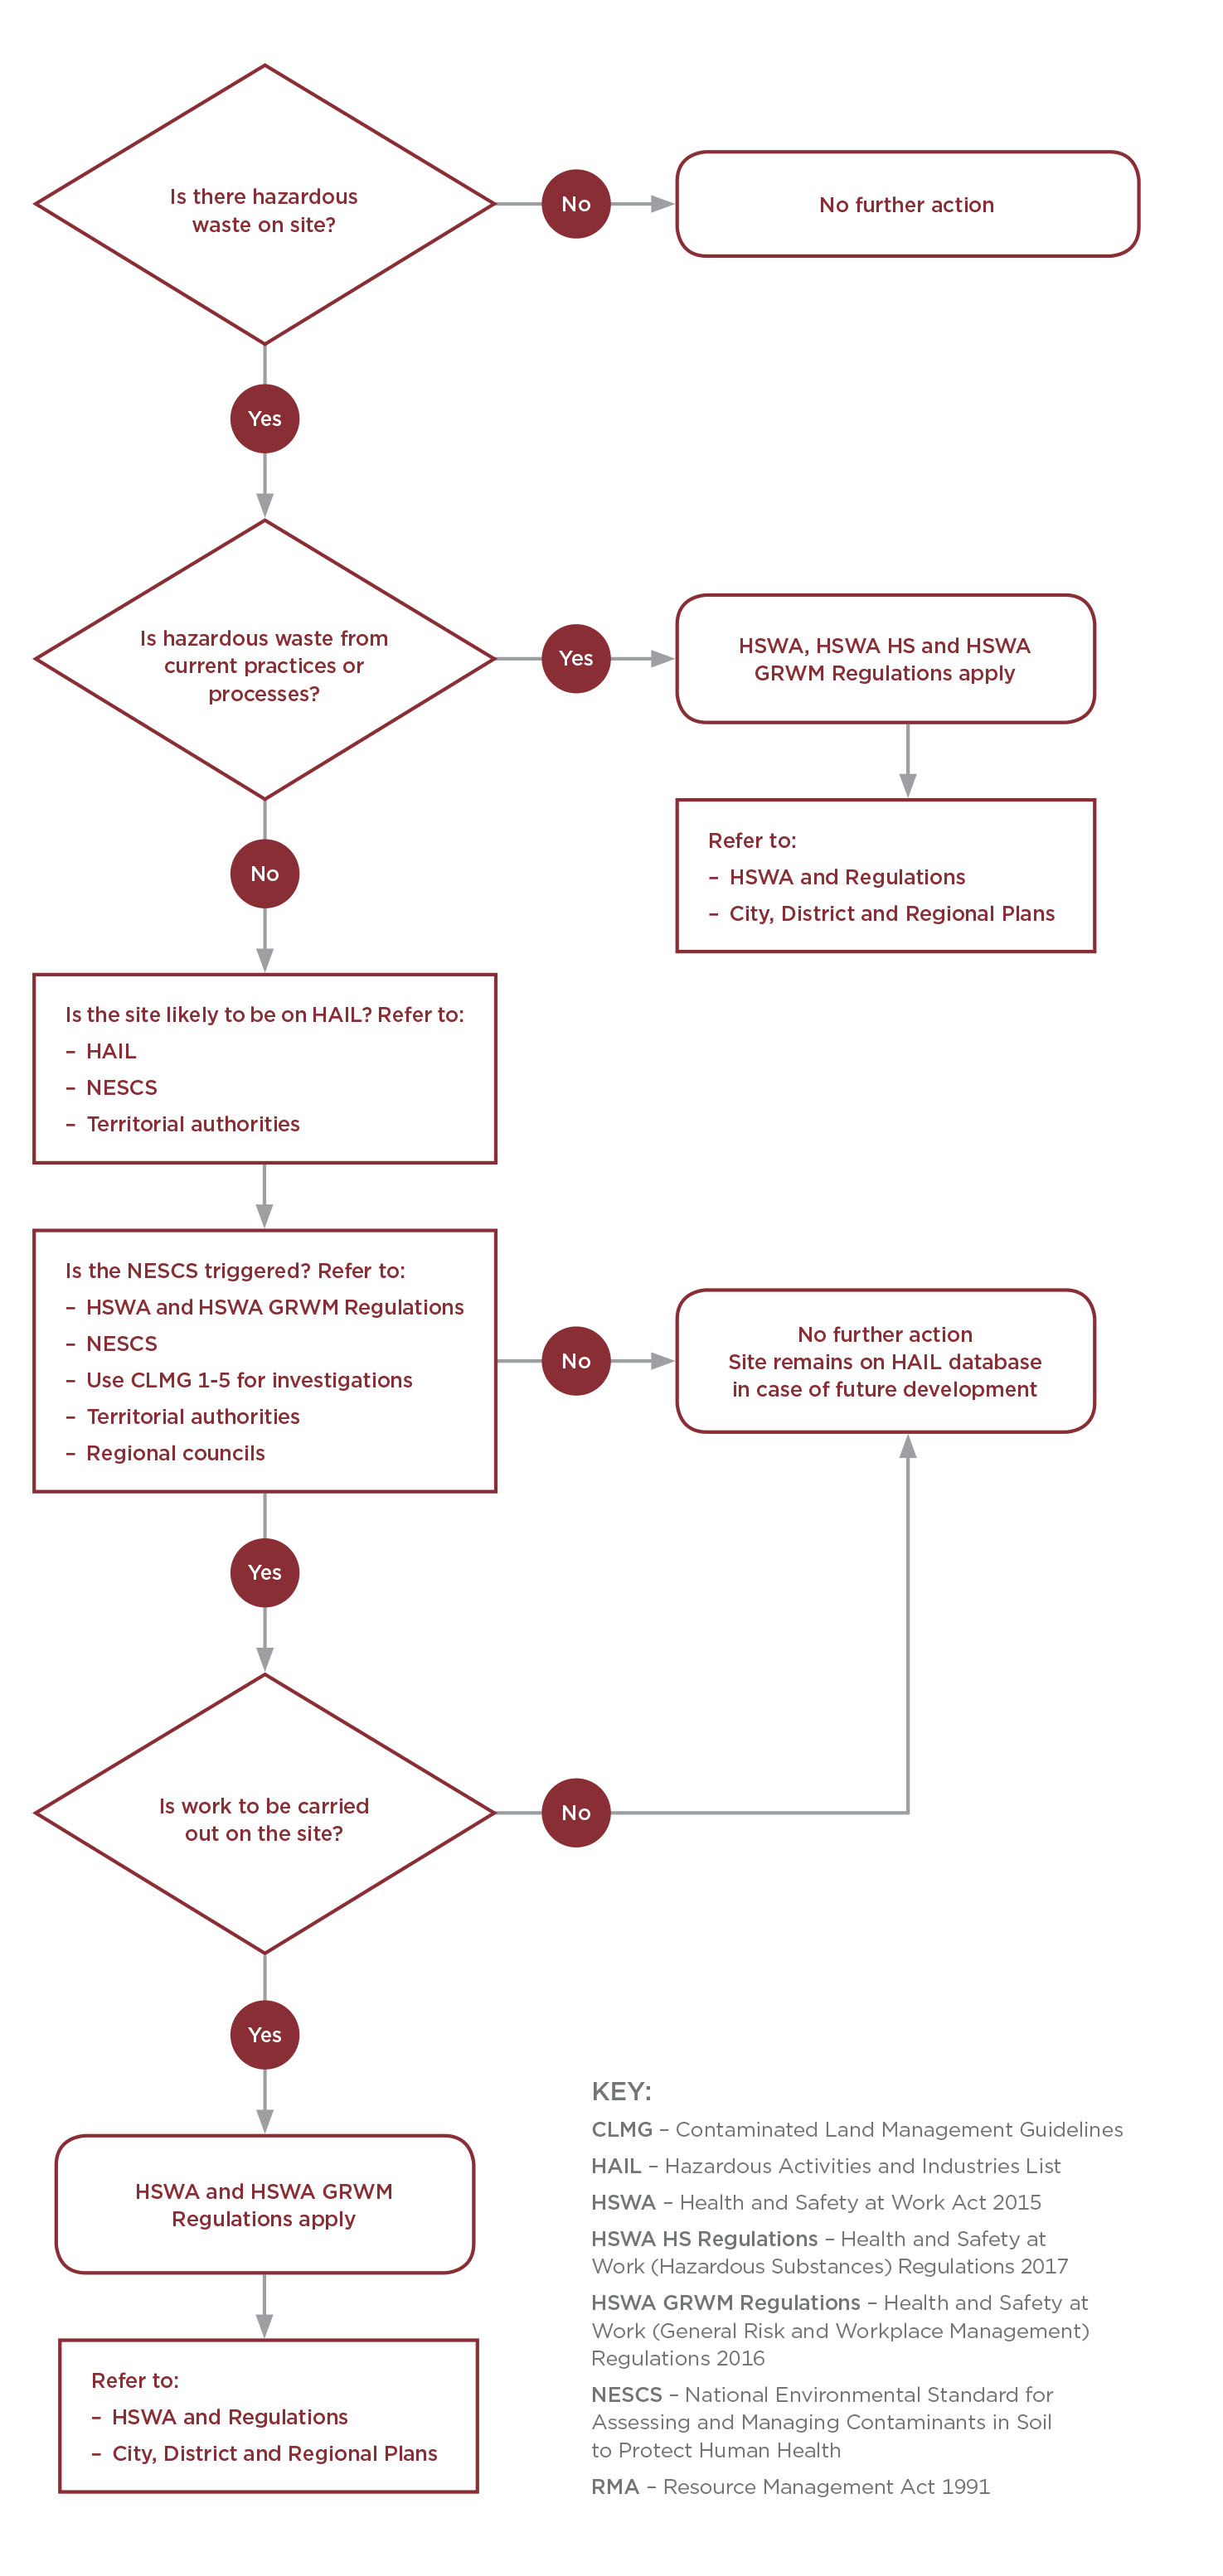 [image] decision tree for those who have contaminated soil on their site